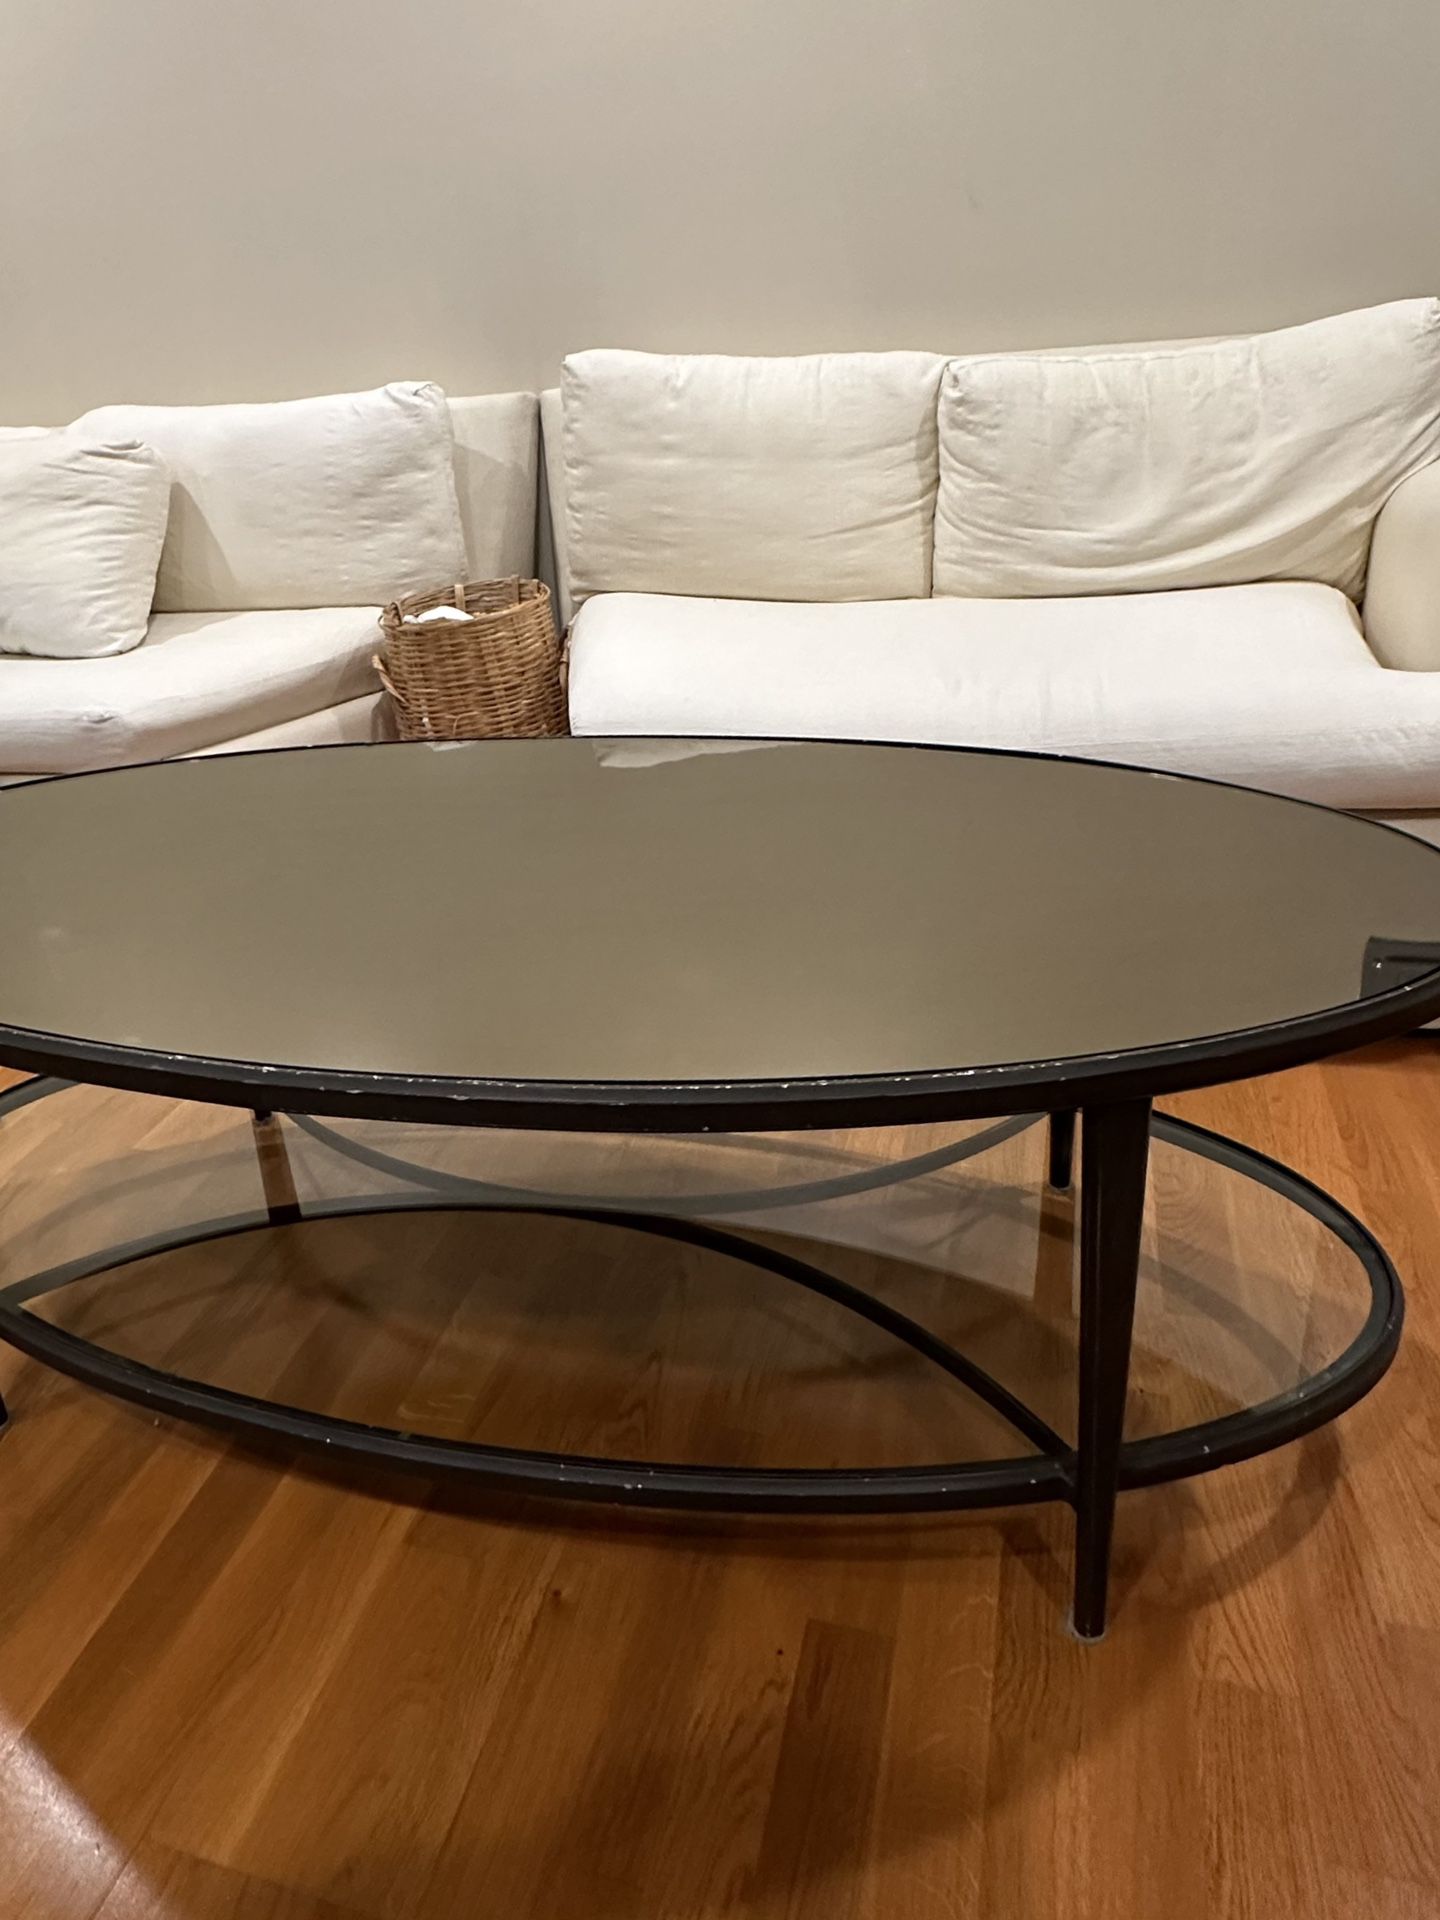 Oval Smoked Glass Mirror Table